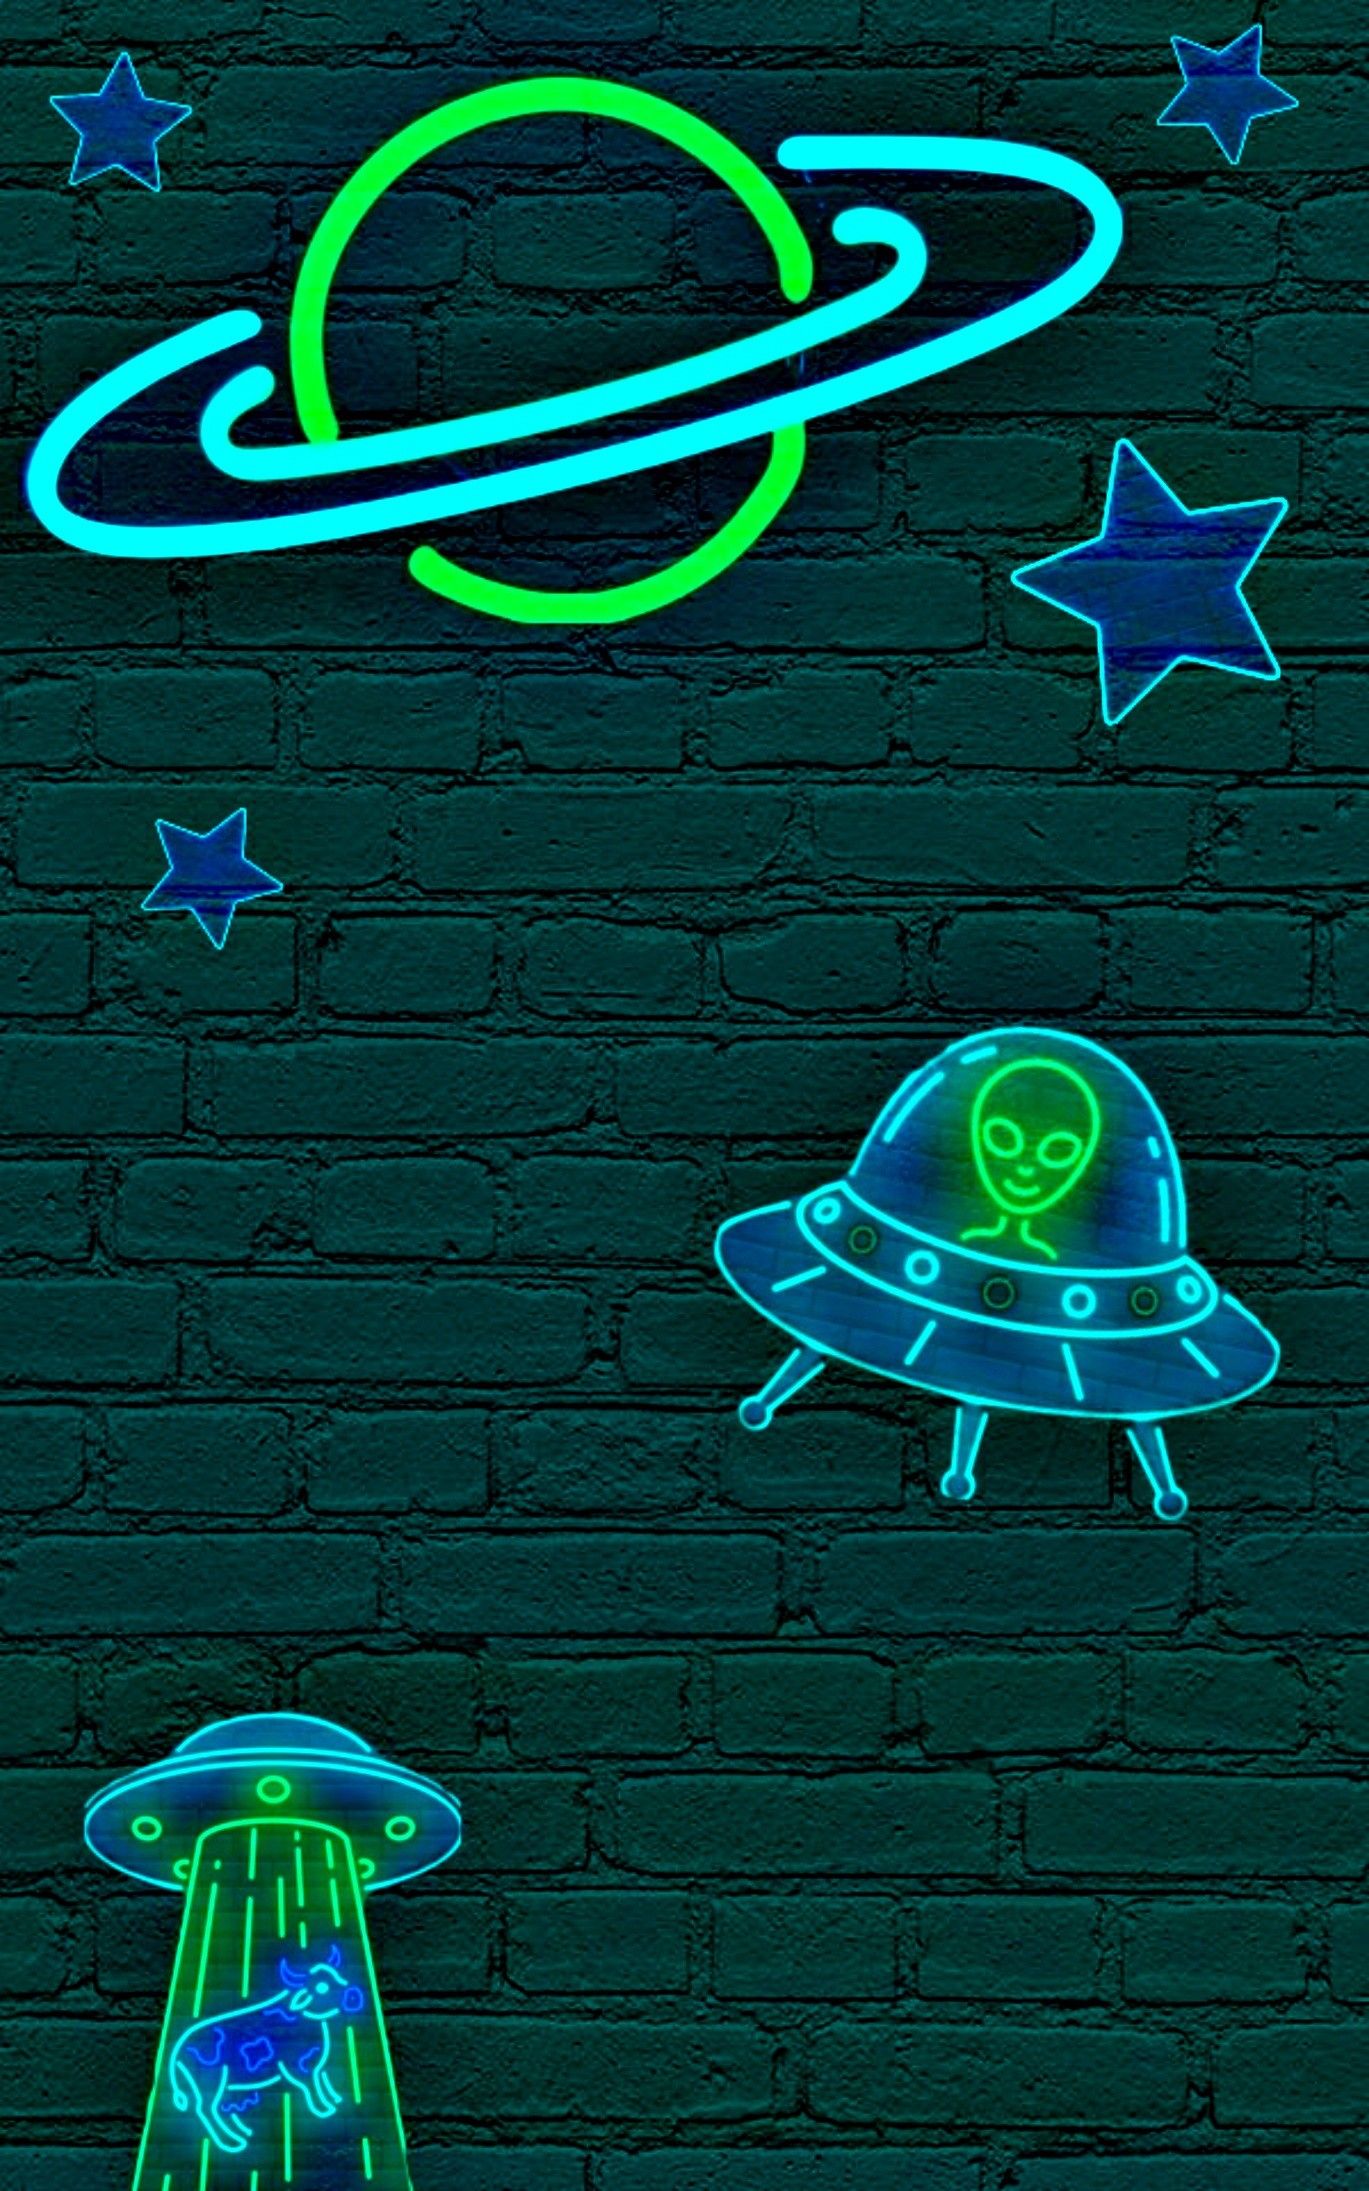 A neon sign with aliens and stars - Alien